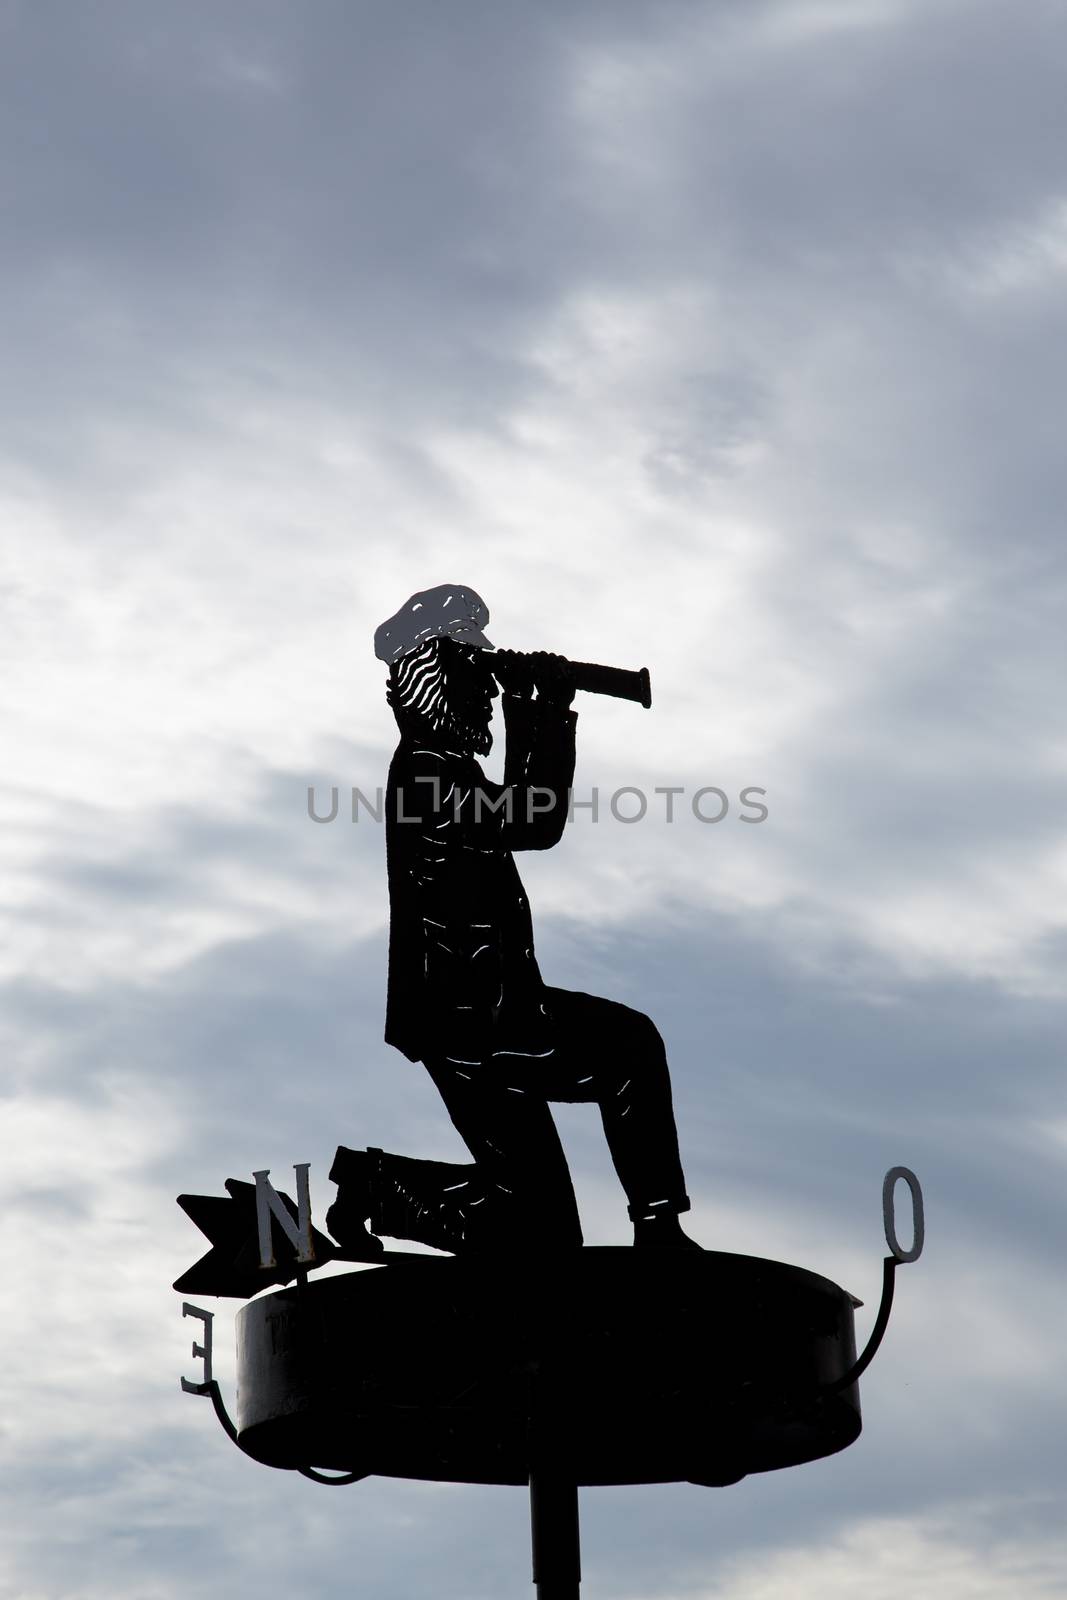 Captain with binoculars as a signpost by sandra_fotodesign